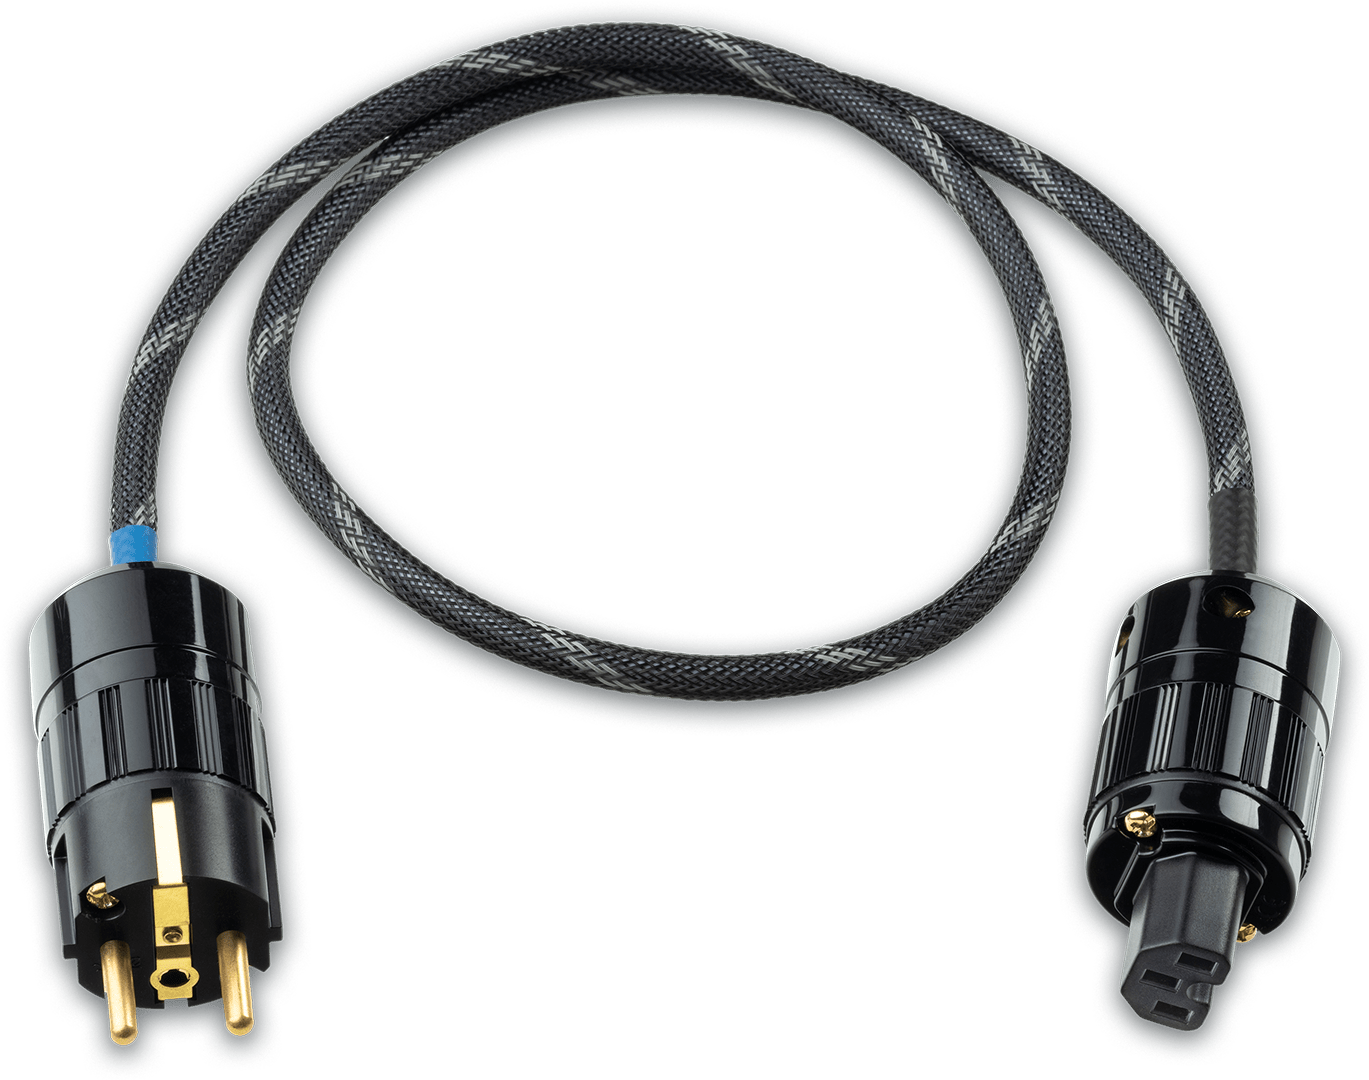 Power Cable PNG HD Image